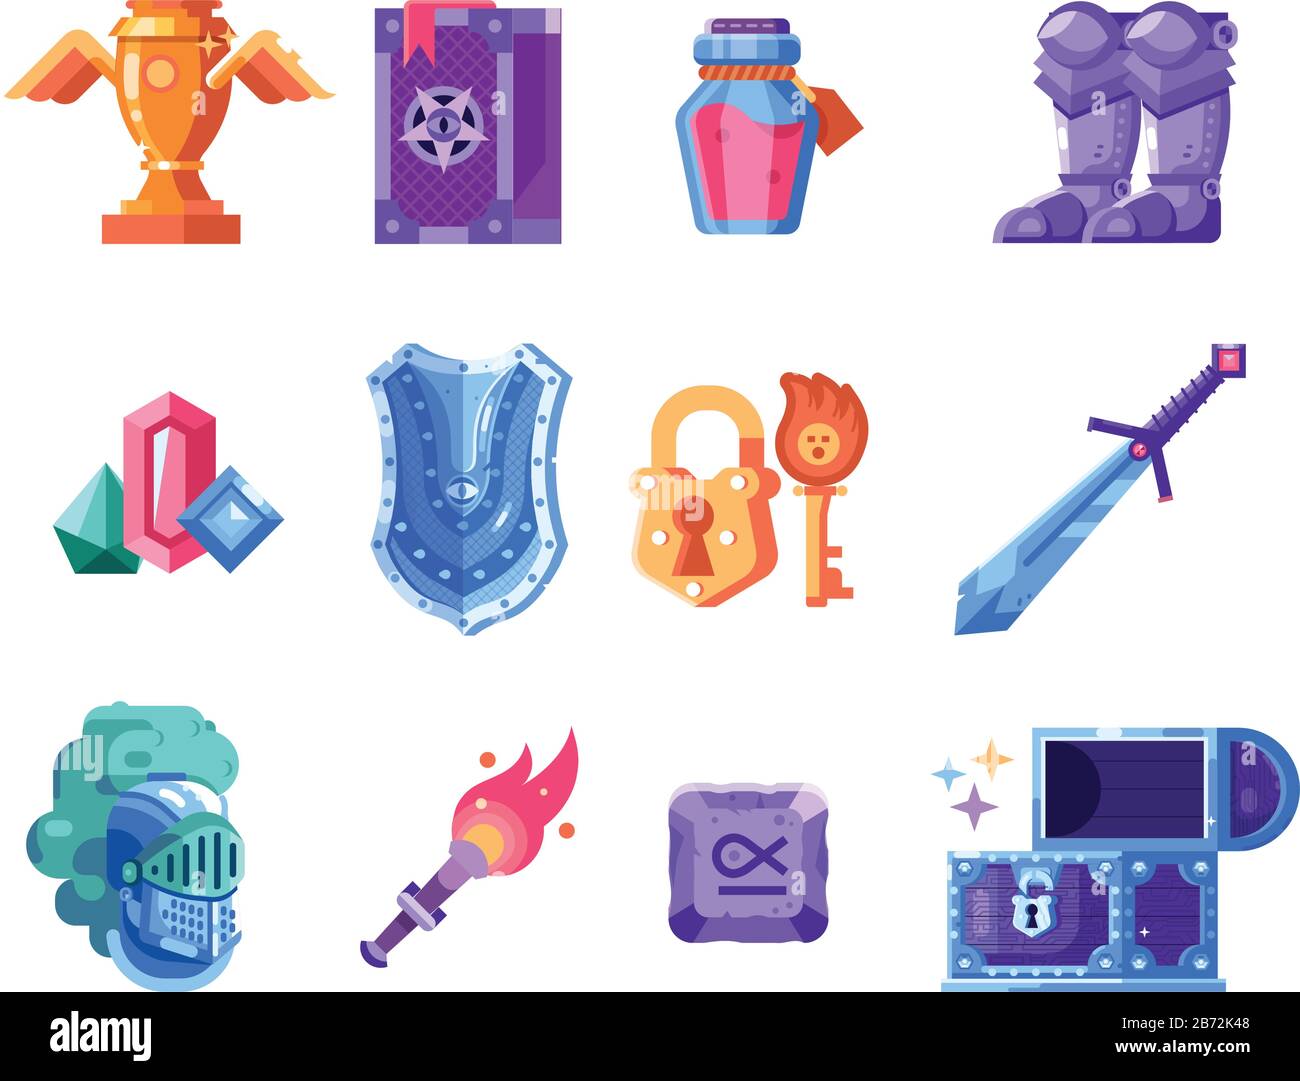 Rpg Game Fantasy Icons with Knight Equipment Stock Vector